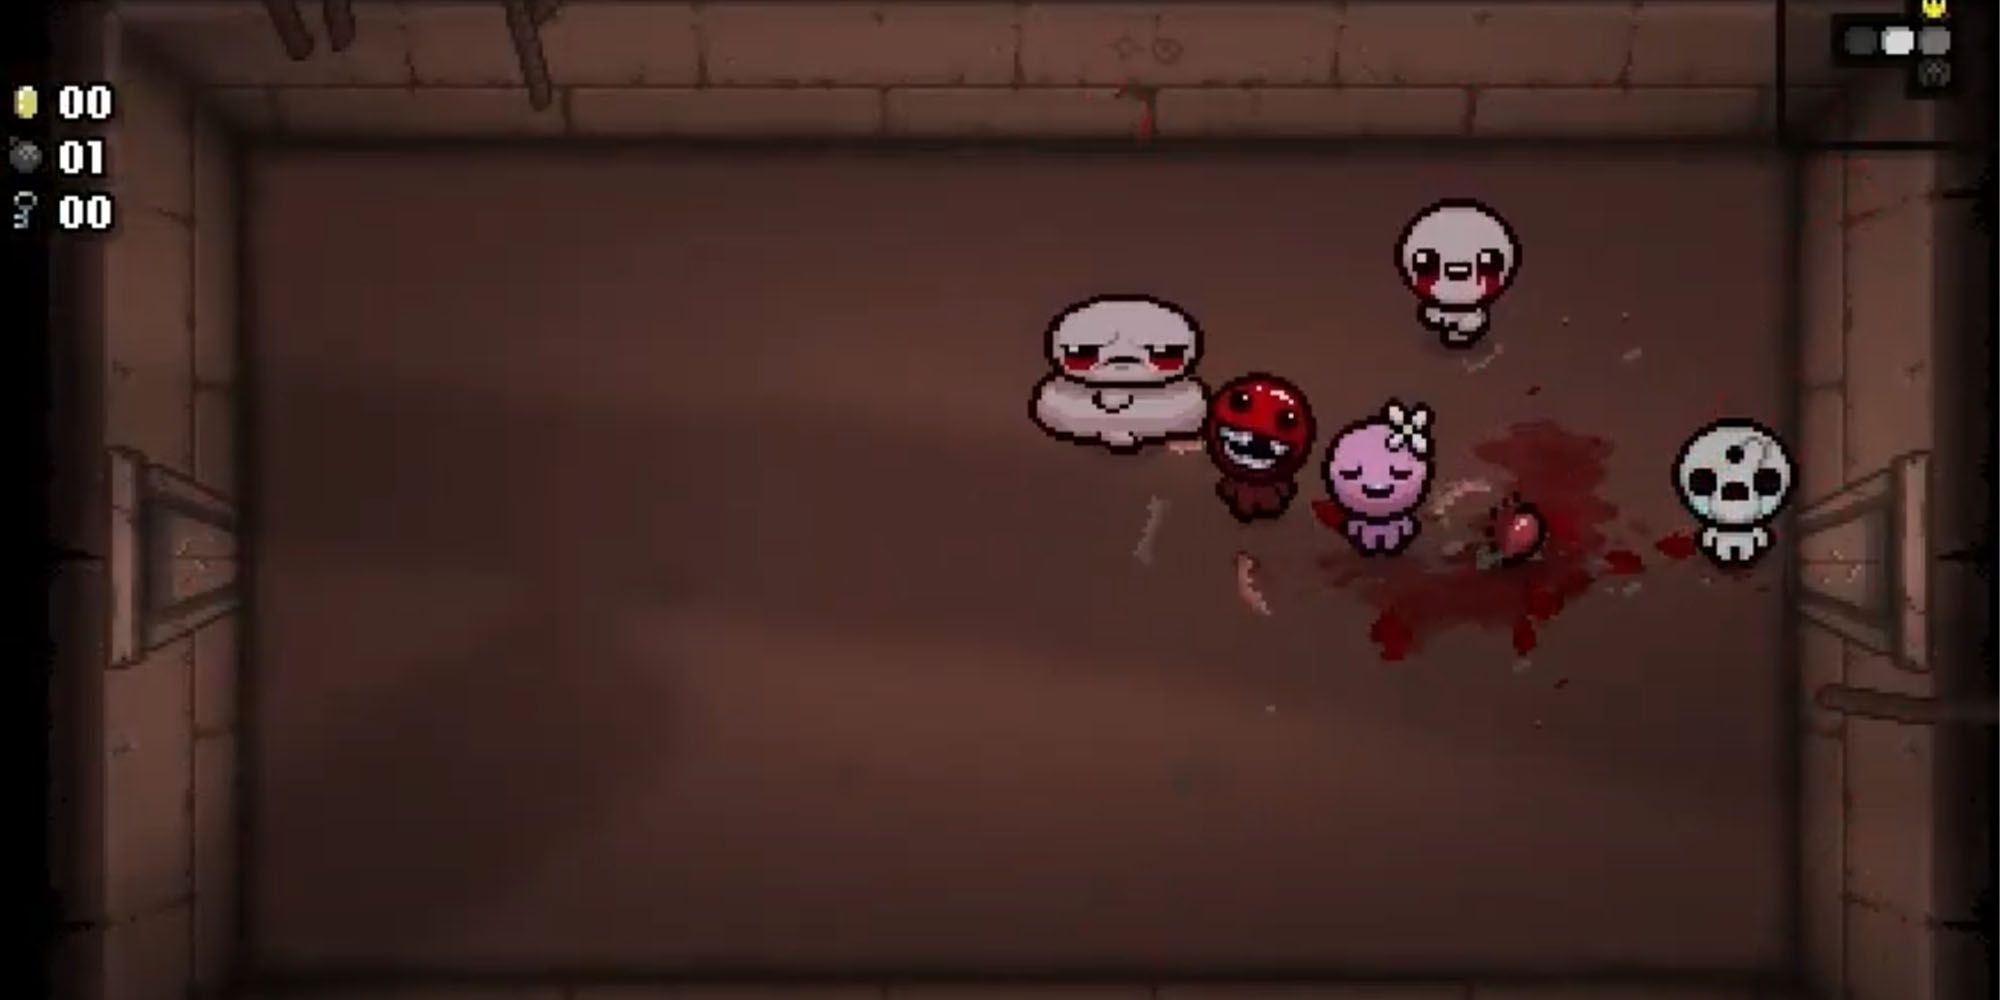 The Binding of Isaac screenshot where Isaac is using Gnawed Leaf as his Super Meat Boy and Bandage Girl kill all enemies in the room